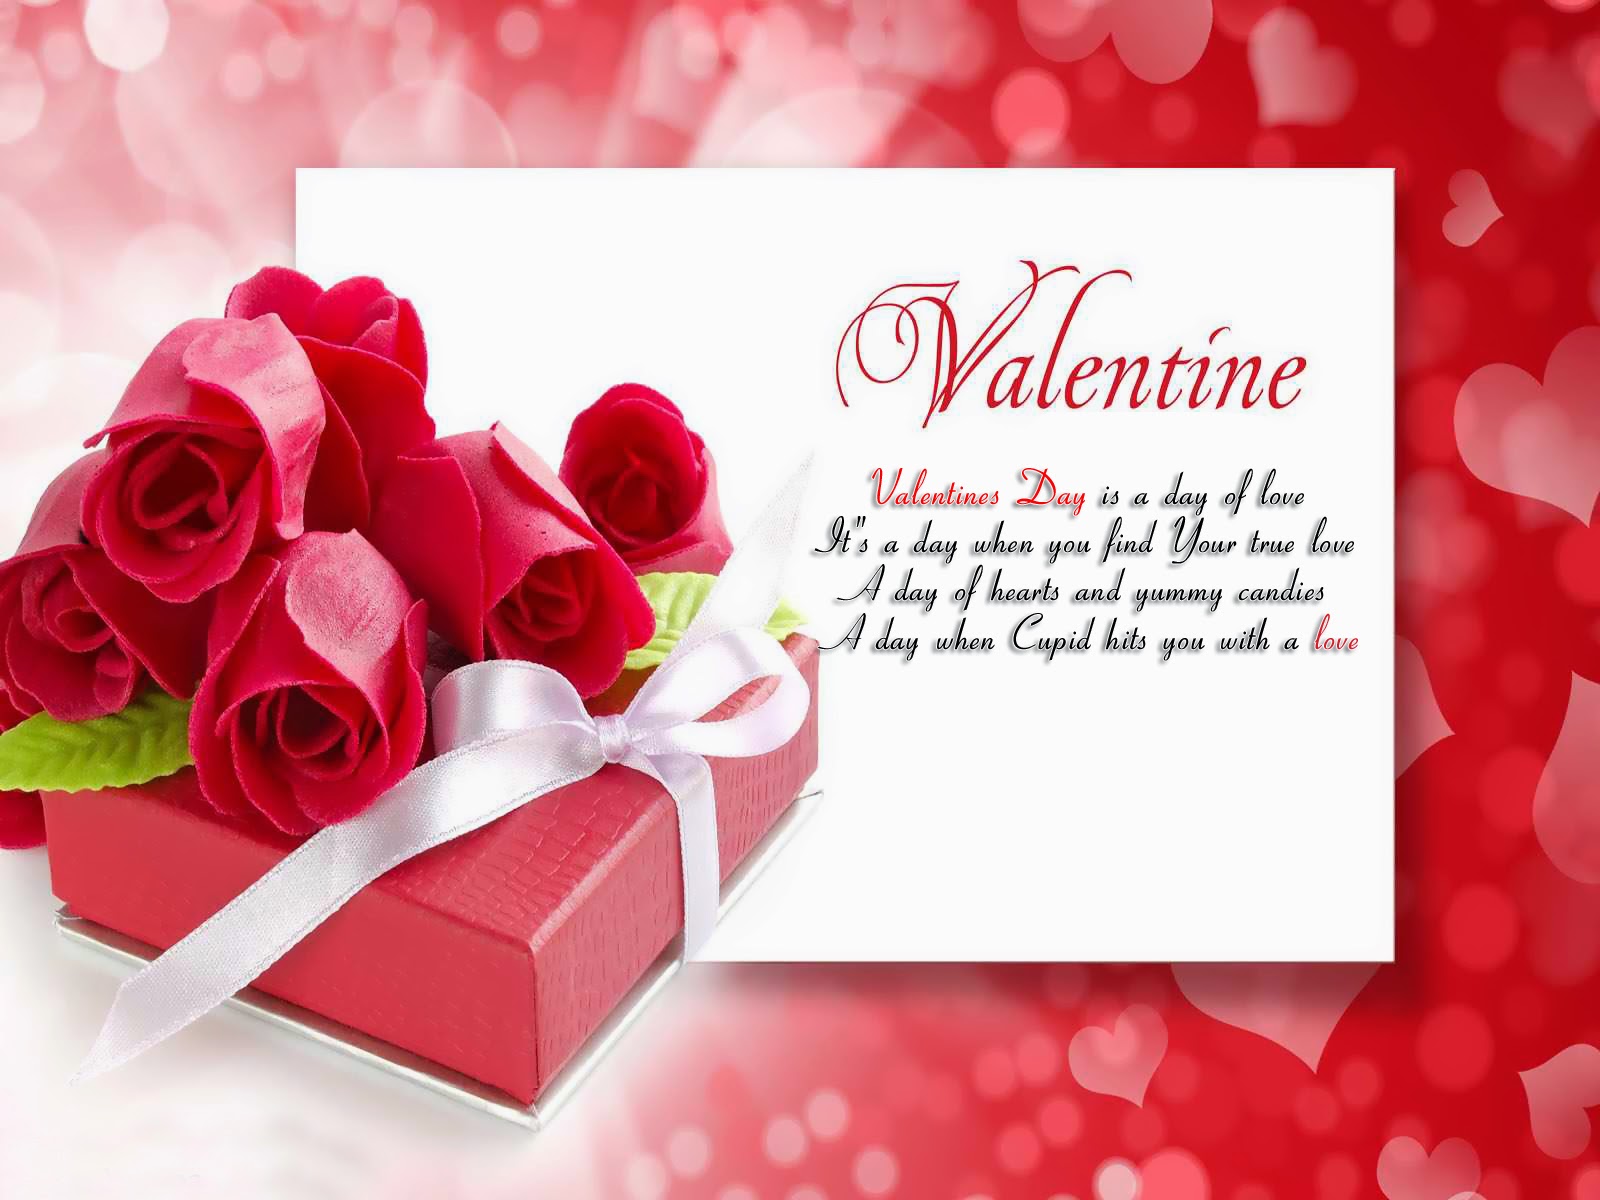 Valentines Day Quotes SMS Wallpapers Text Messages Happy Valentines Day Cards Wishes Greetings of Valentine s Day SMS Quotes Wallpapers